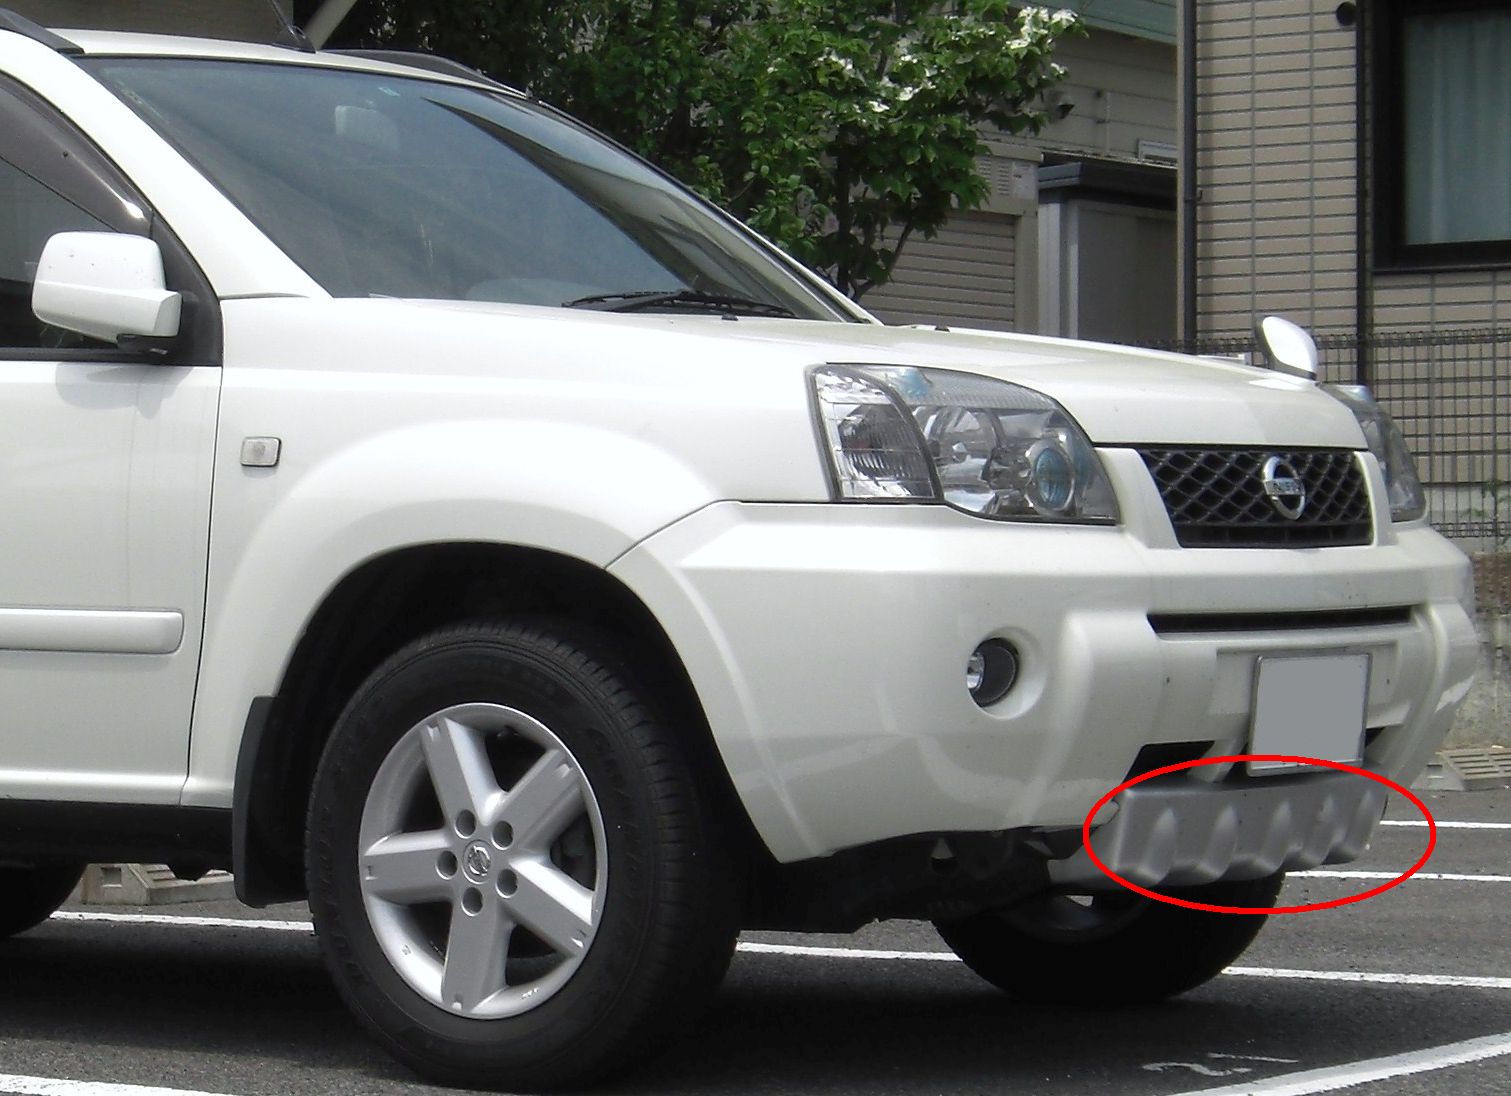 x-trailers--all-about-nissan-x-trail